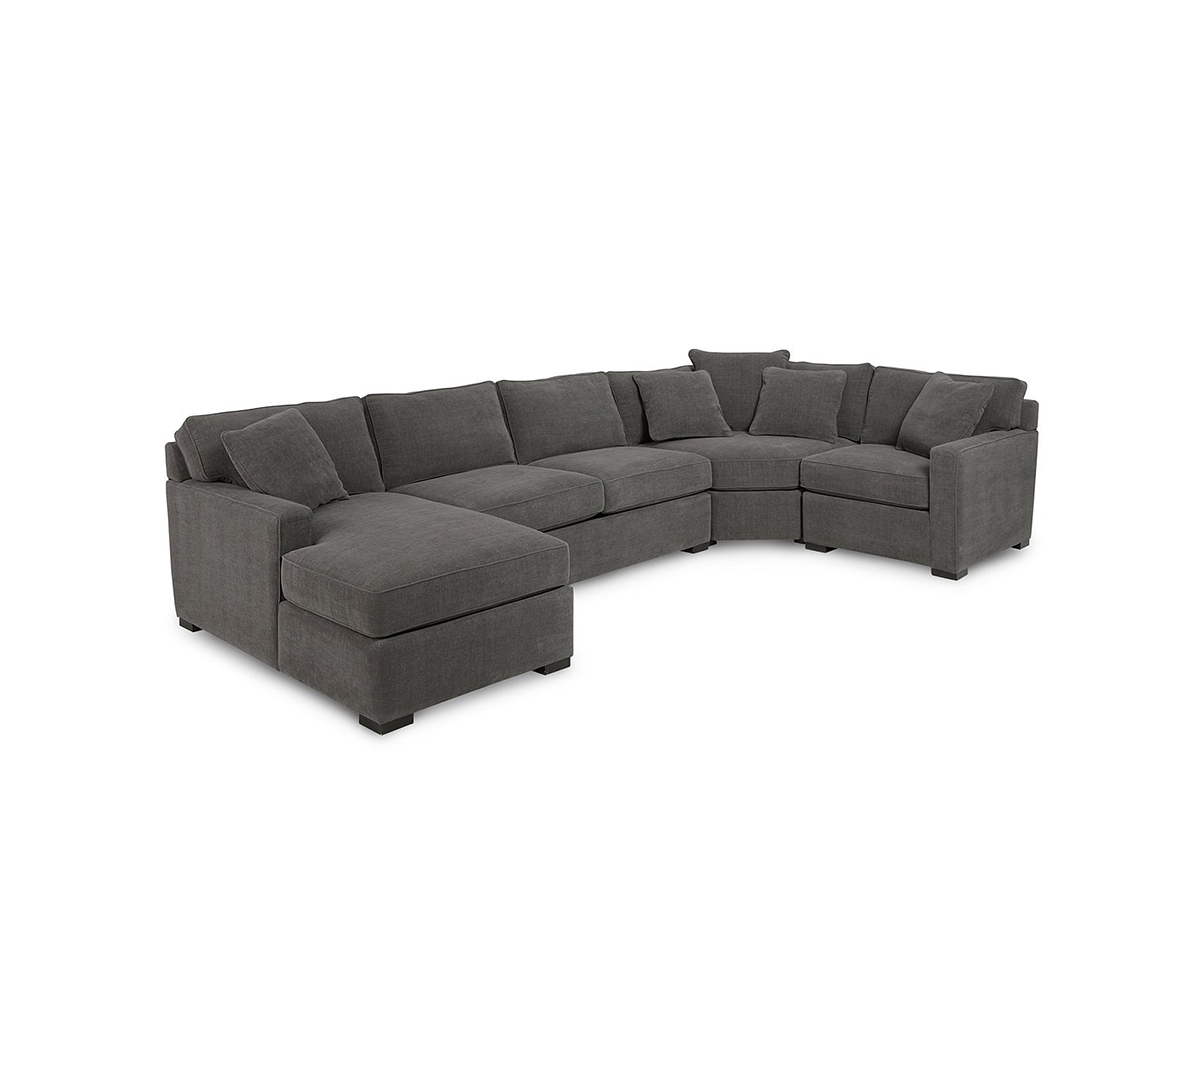 Radley 4-Pc. Fabric Chaise Sectional Sofa with Wedge Piece, Created for Macys